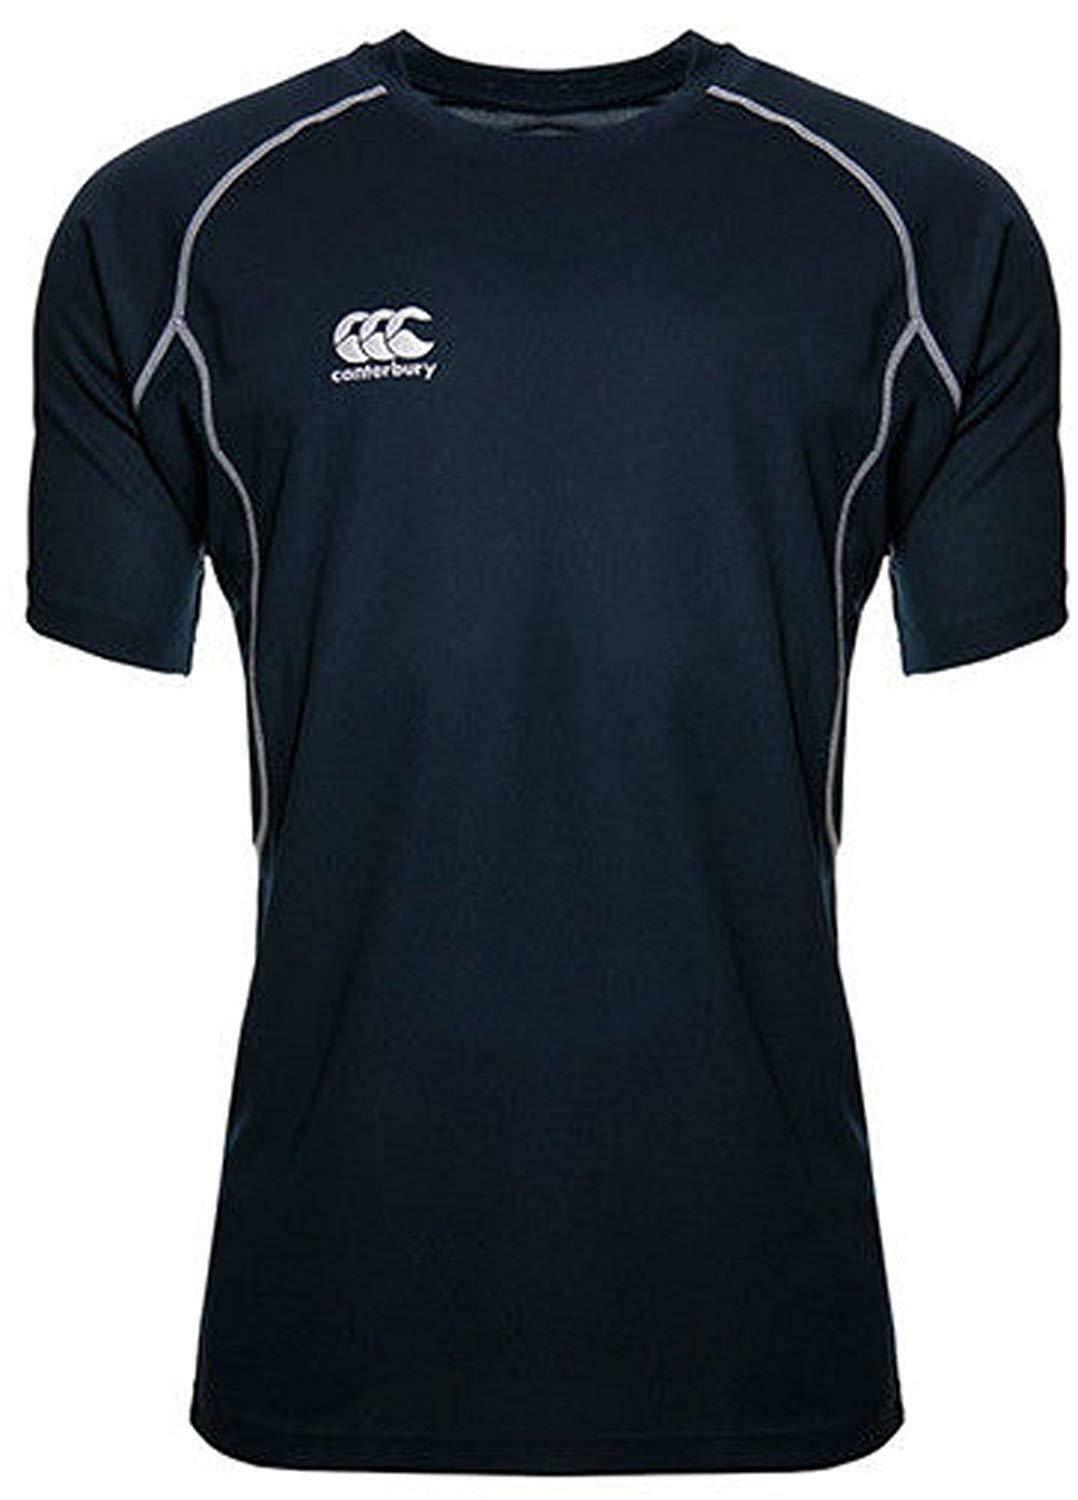 Rugby Heaven Canterbury Classic Dry Adults T-Shirt - www.rugby-heaven.co.uk